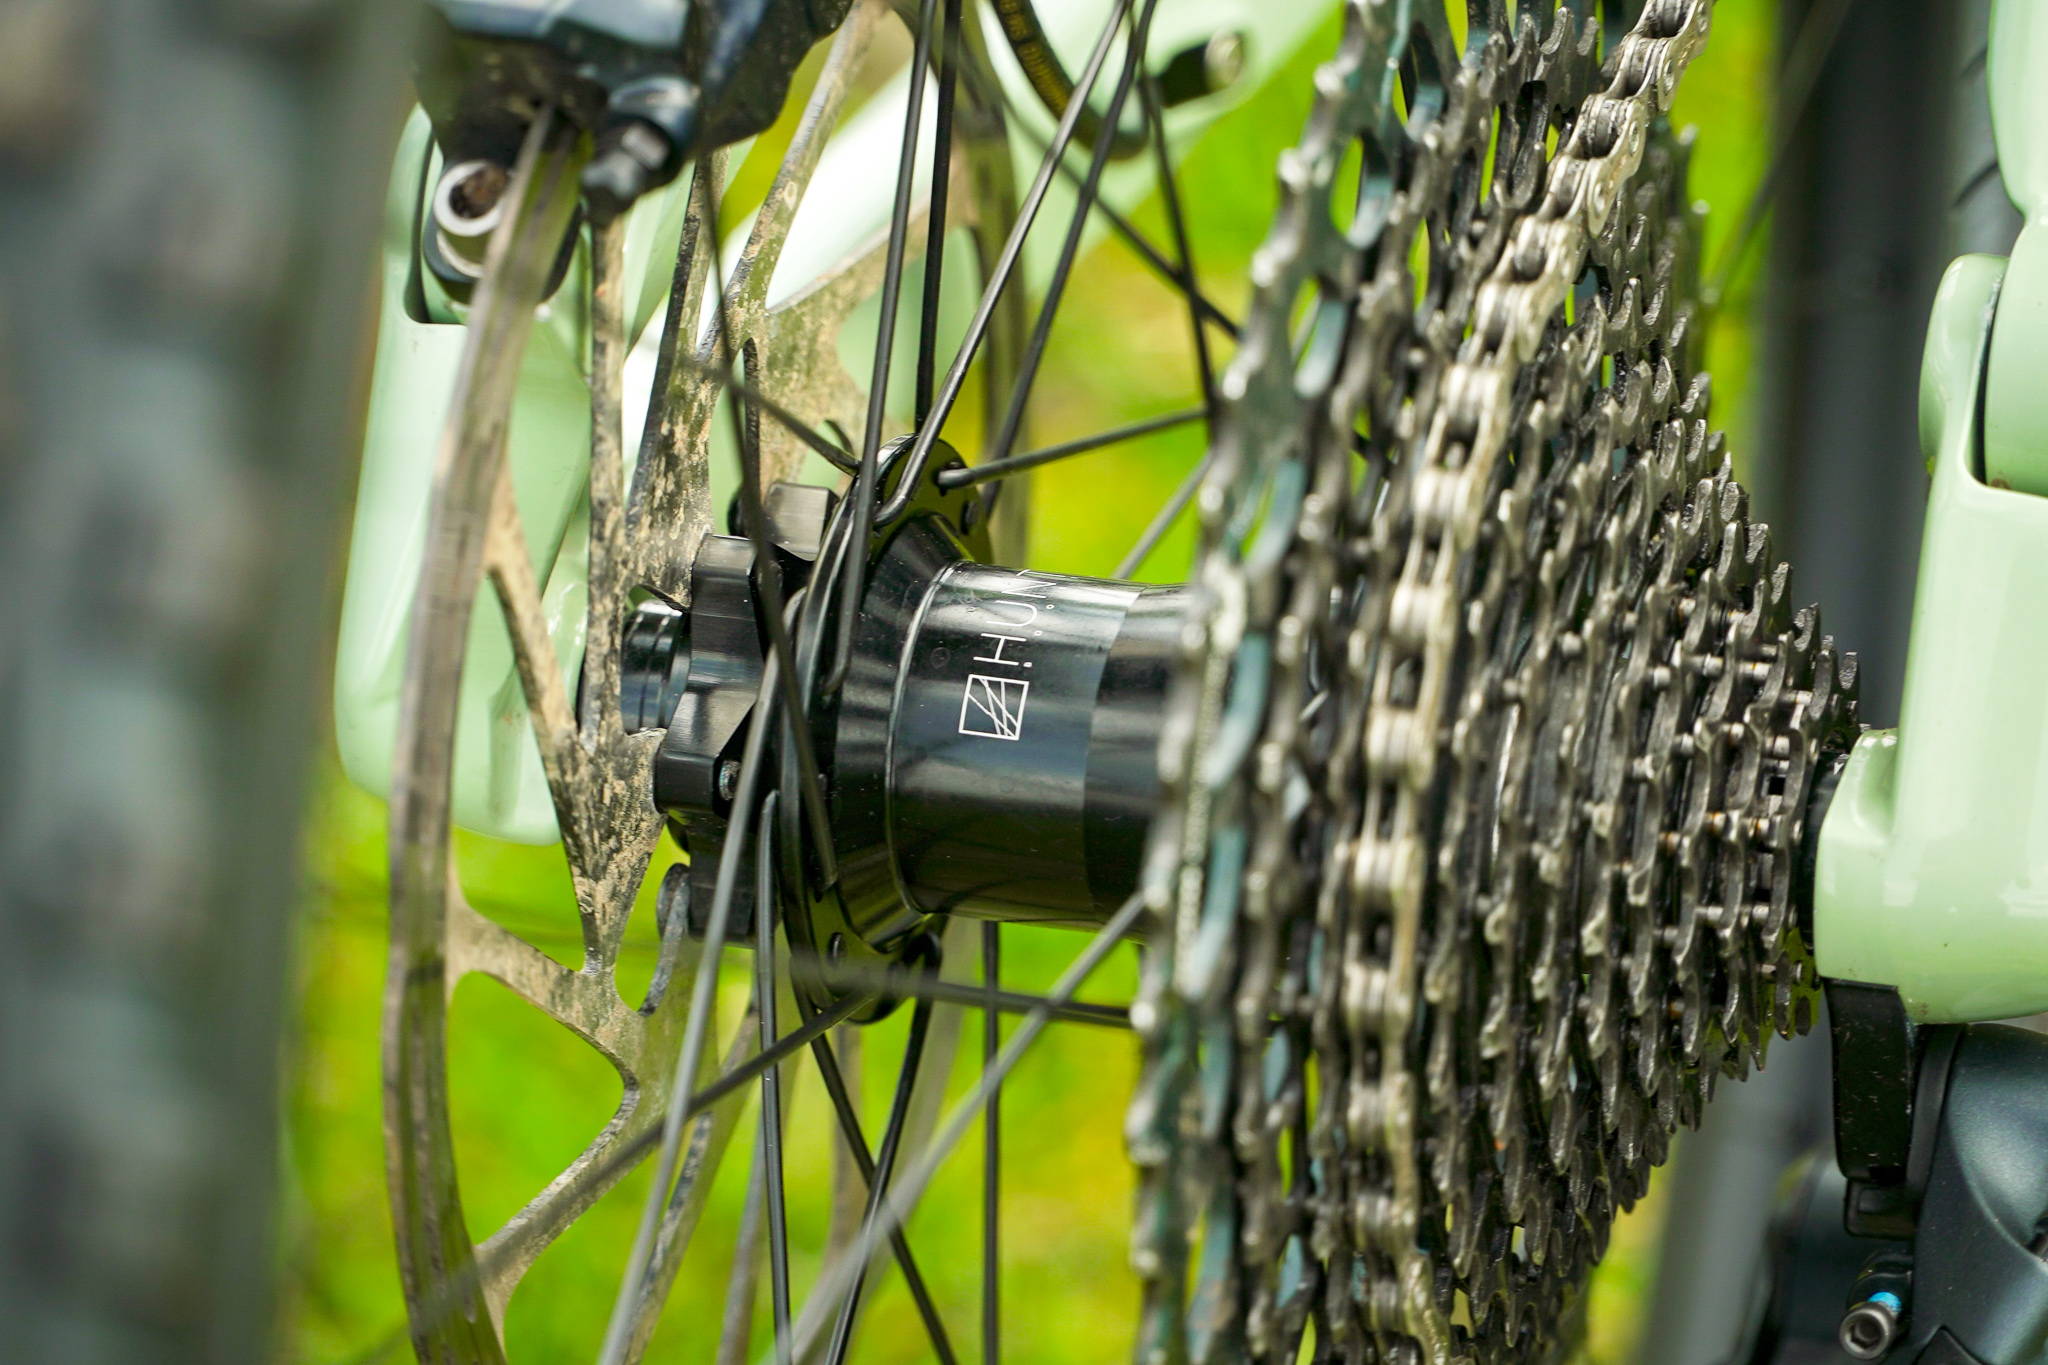 Andi's rear hub and cassette